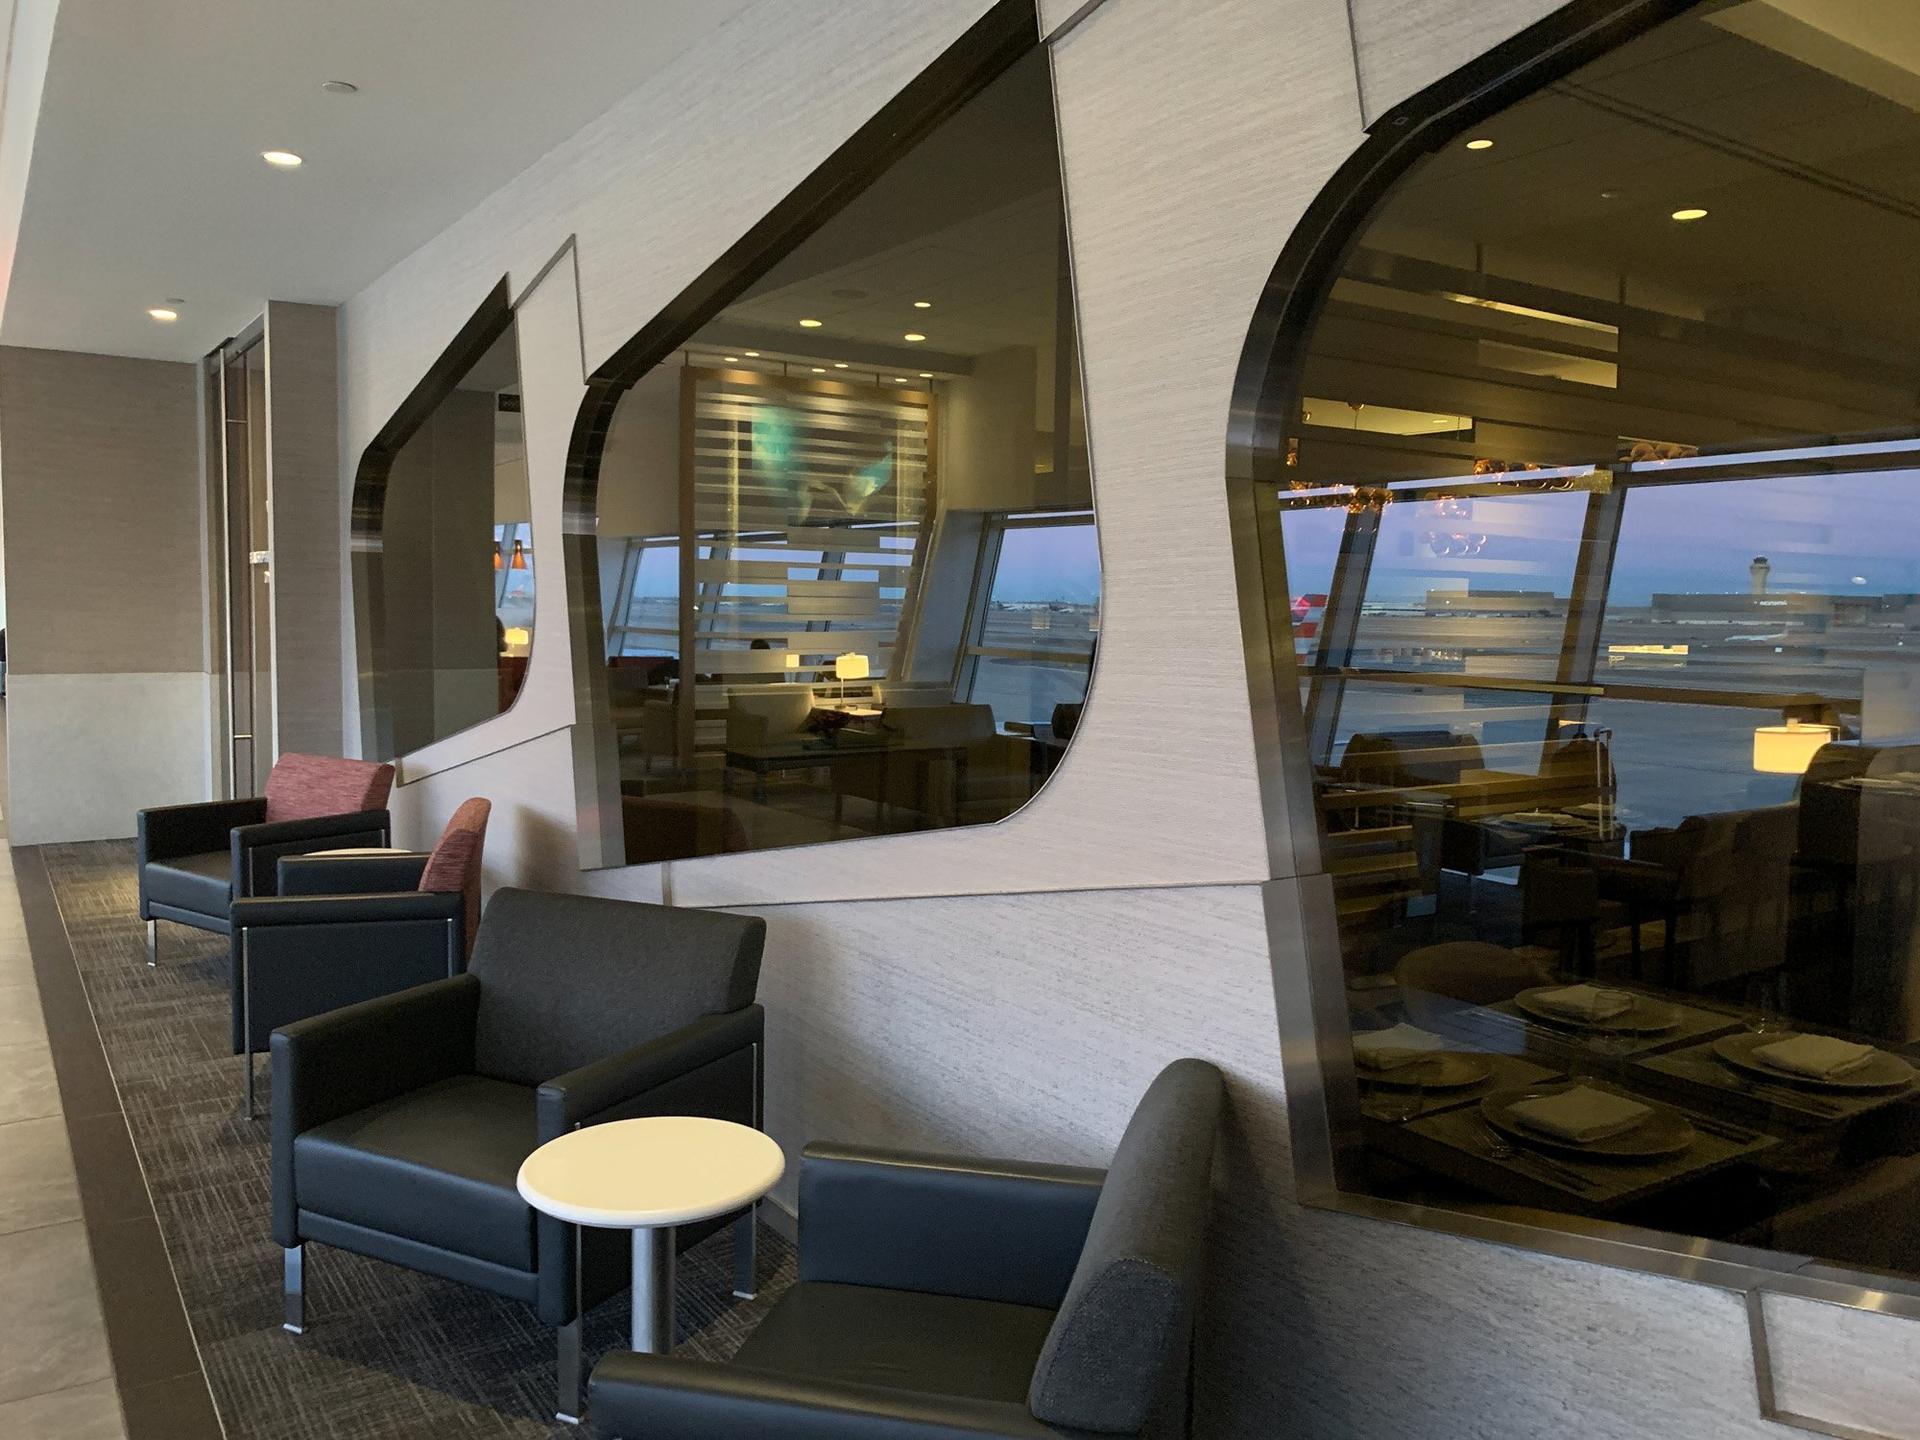 American Airlines Flagship Lounge image 54 of 55